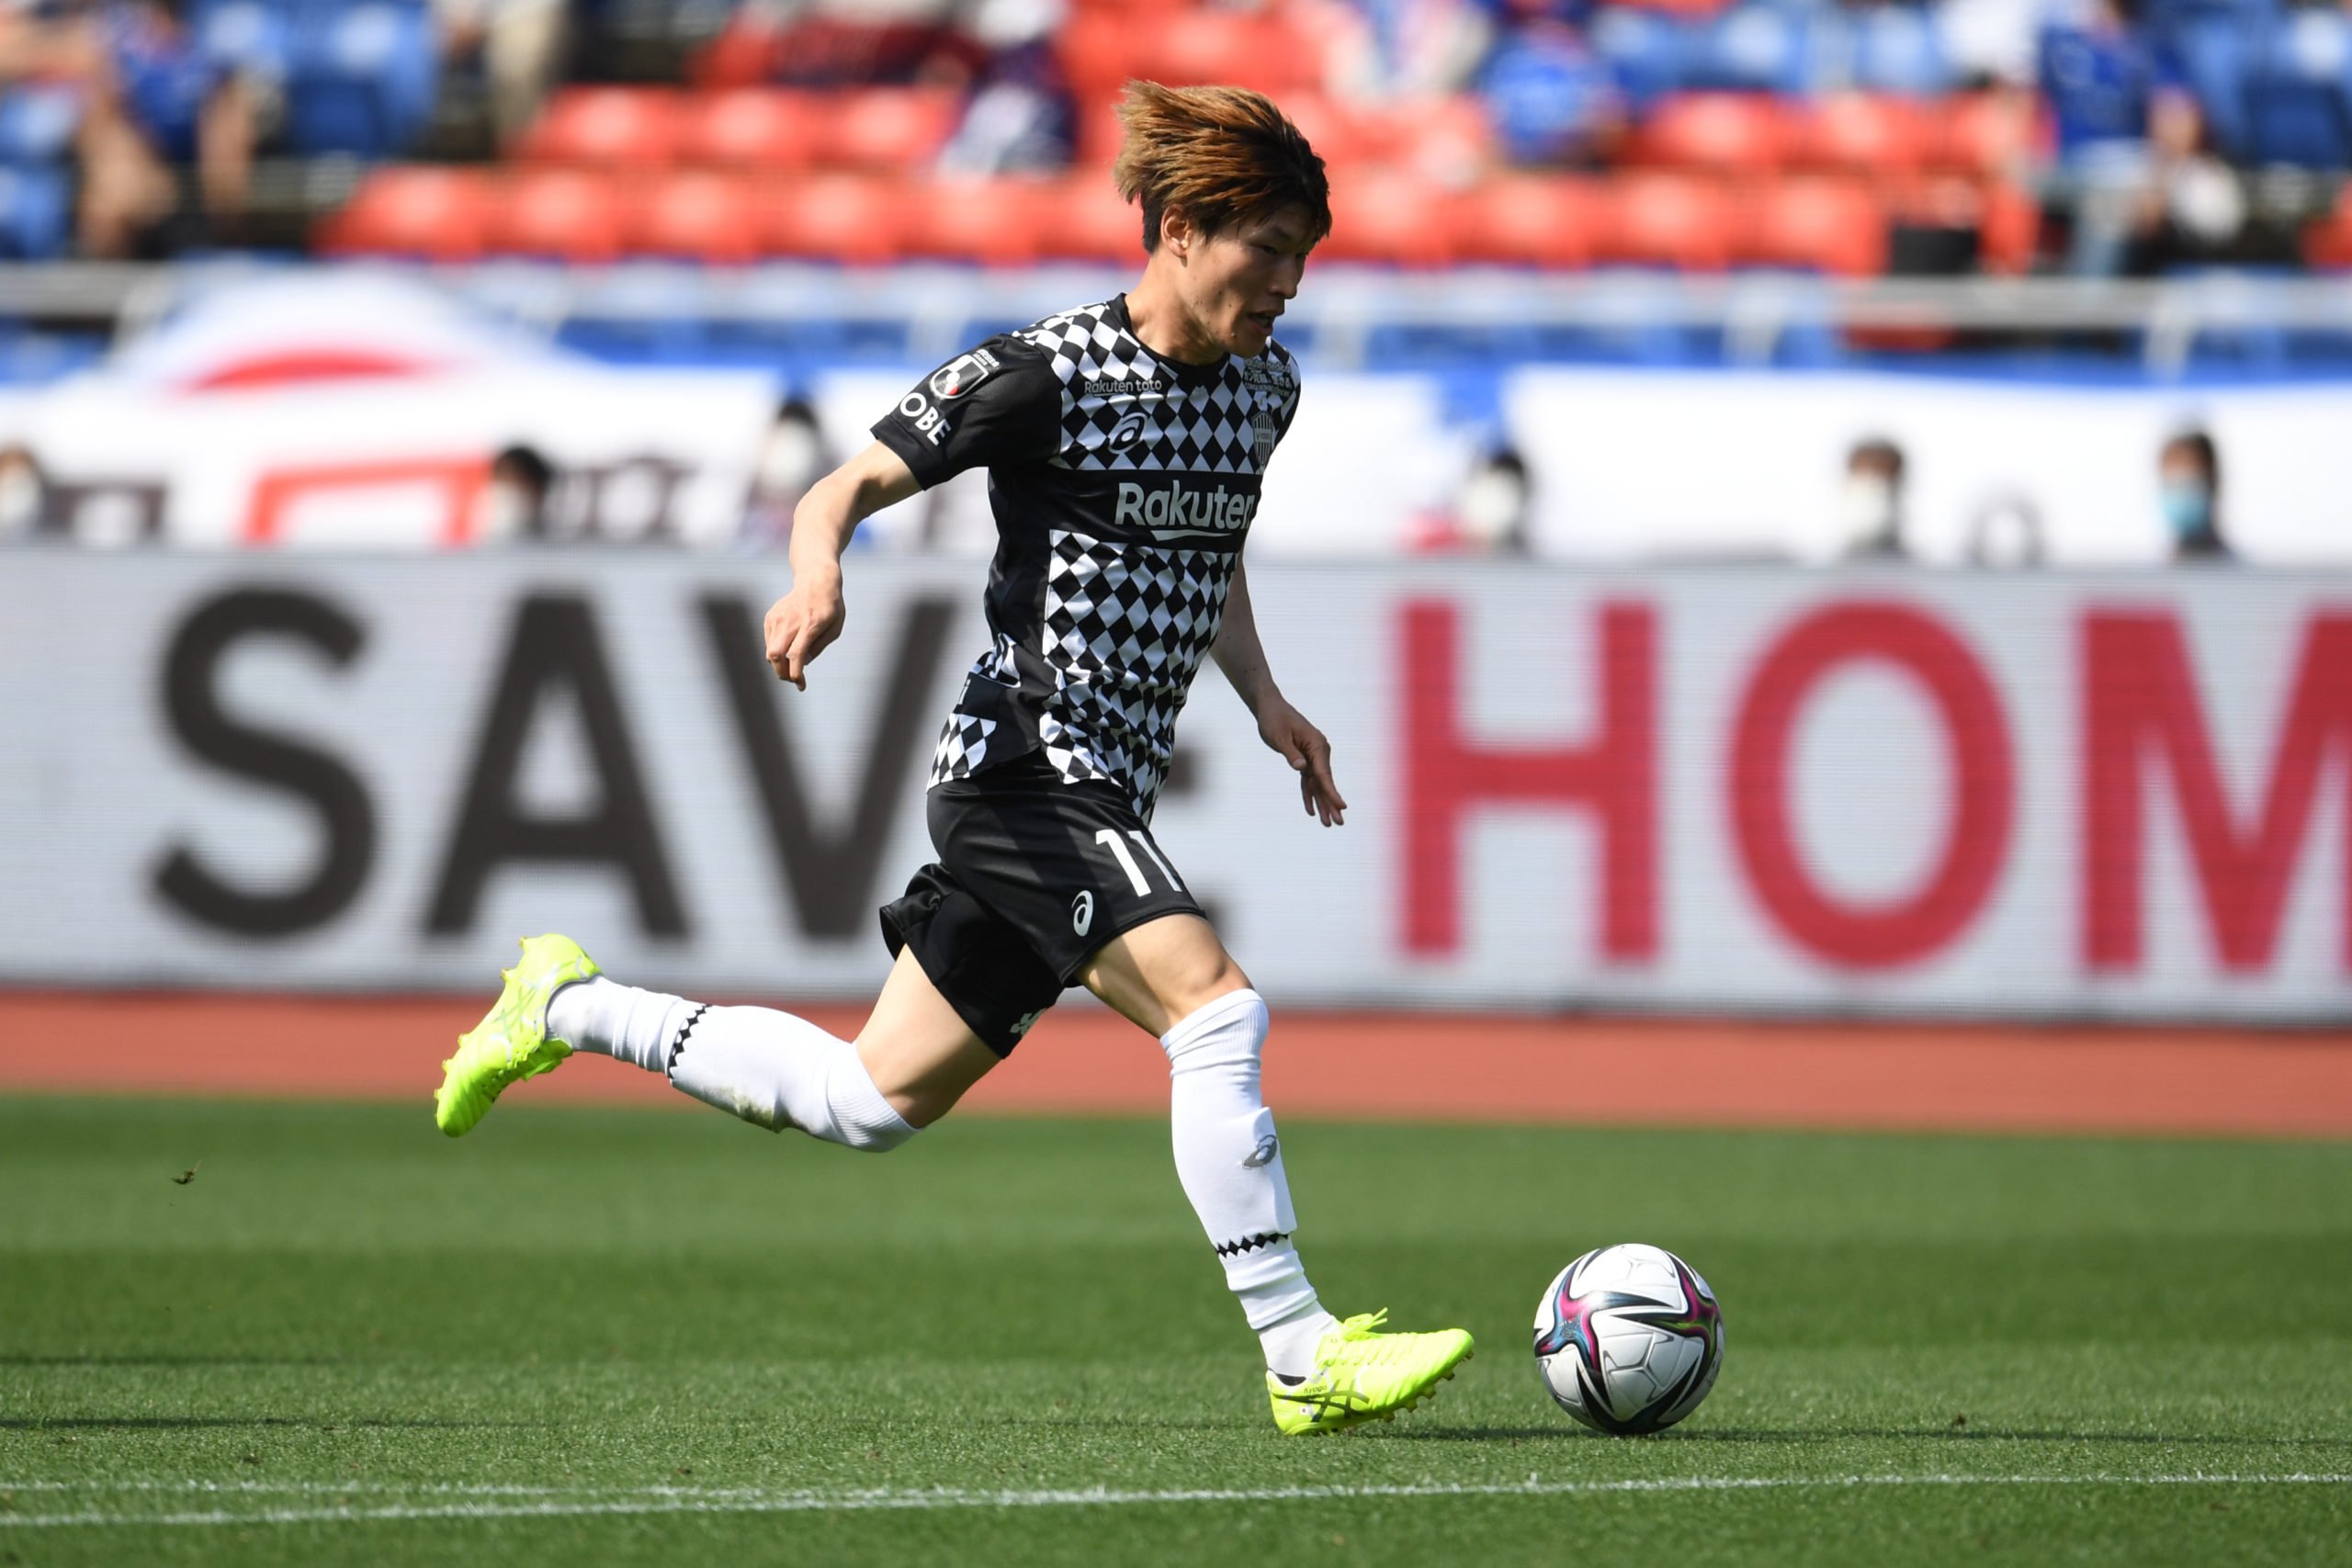 Celtic signing of Kyogo Furuhashi could net his high school $95k